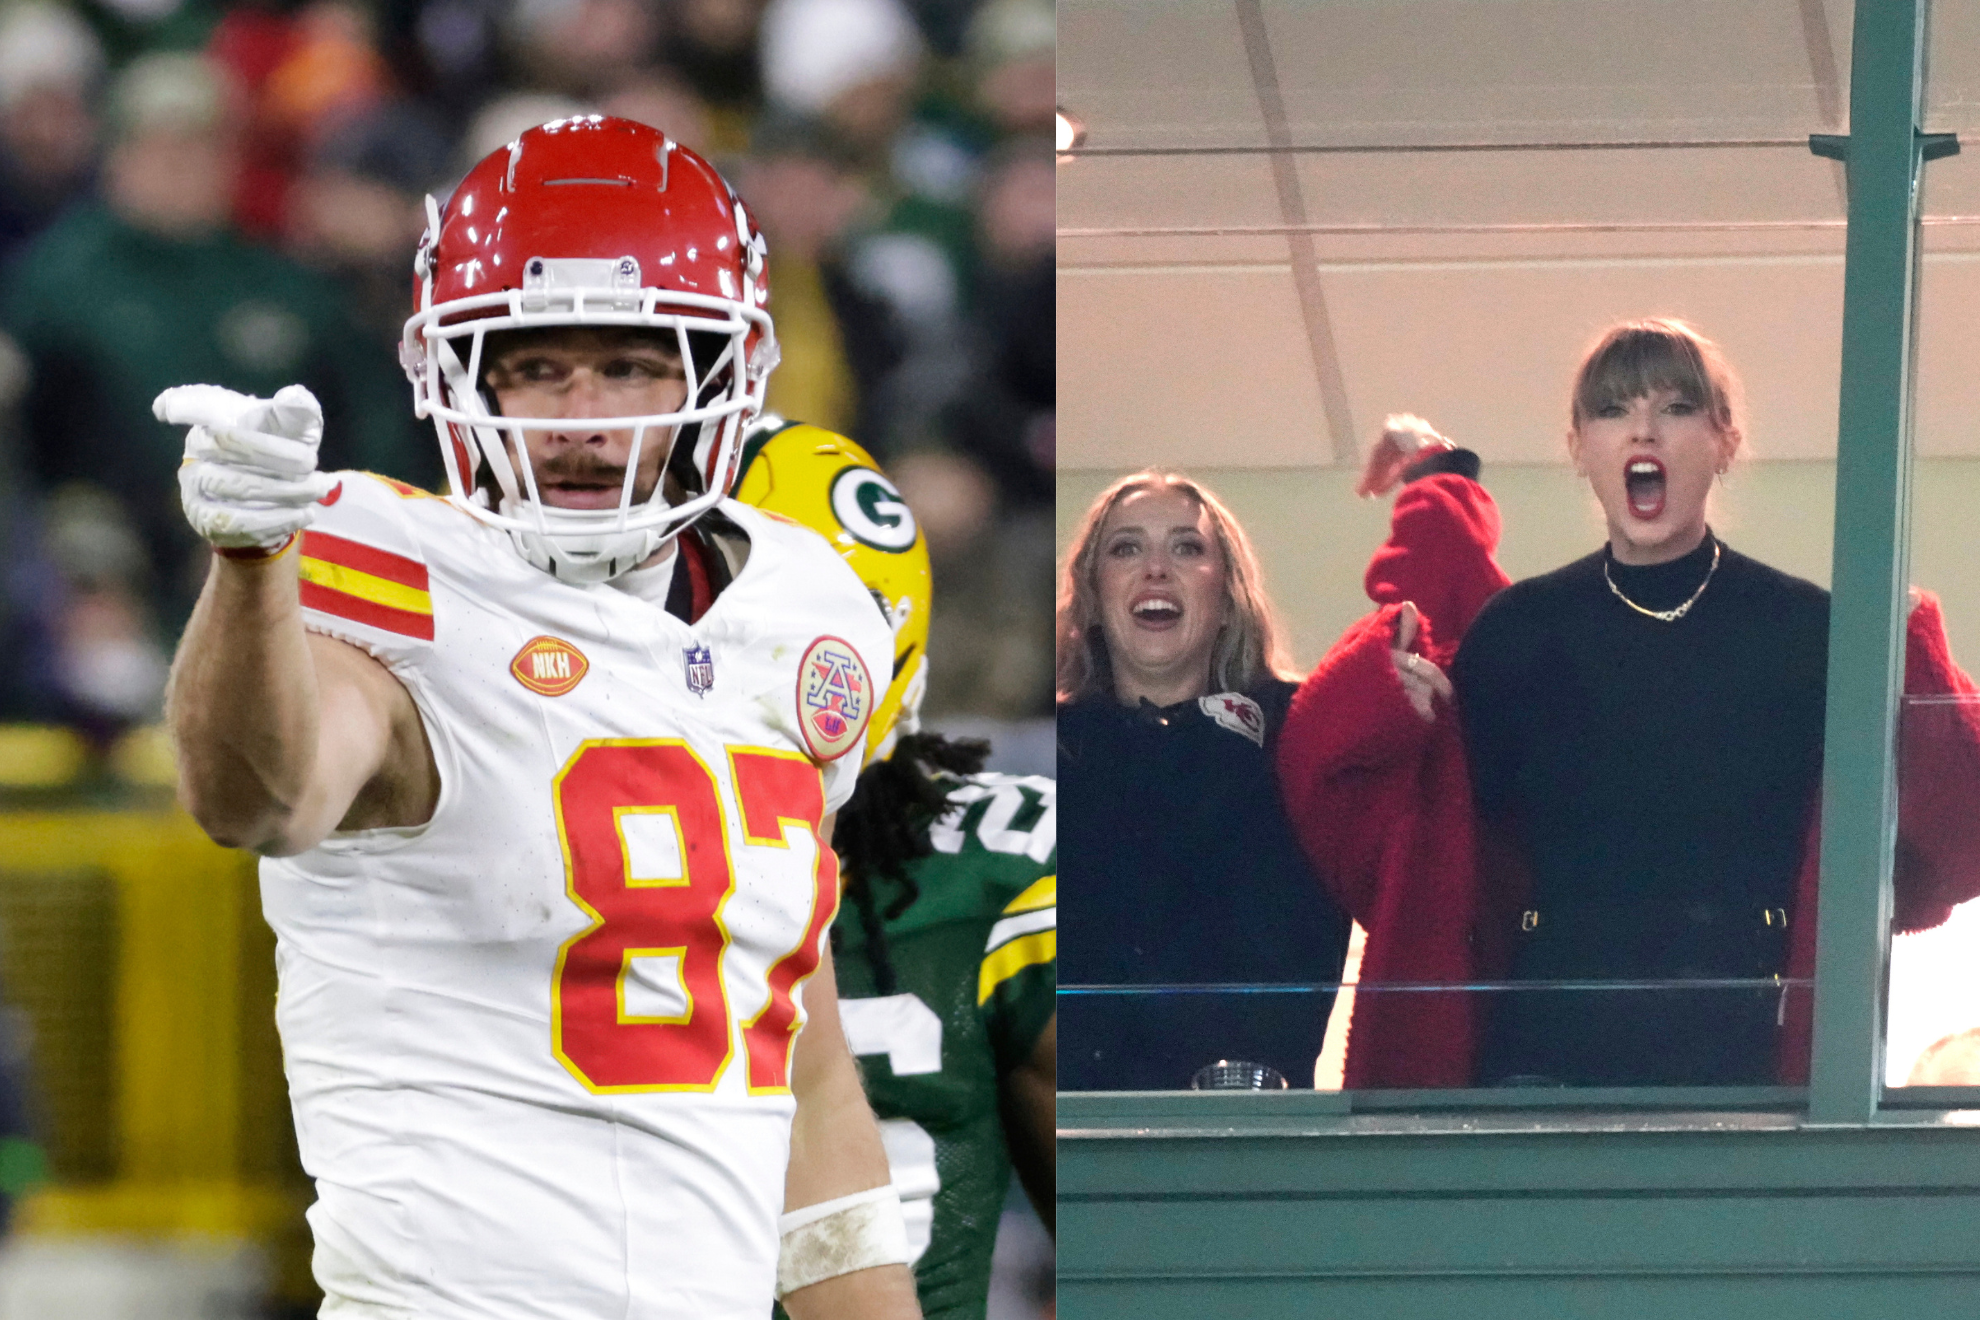 Kelce is hoping the Chiefs pull out the victory with Swift looking on.